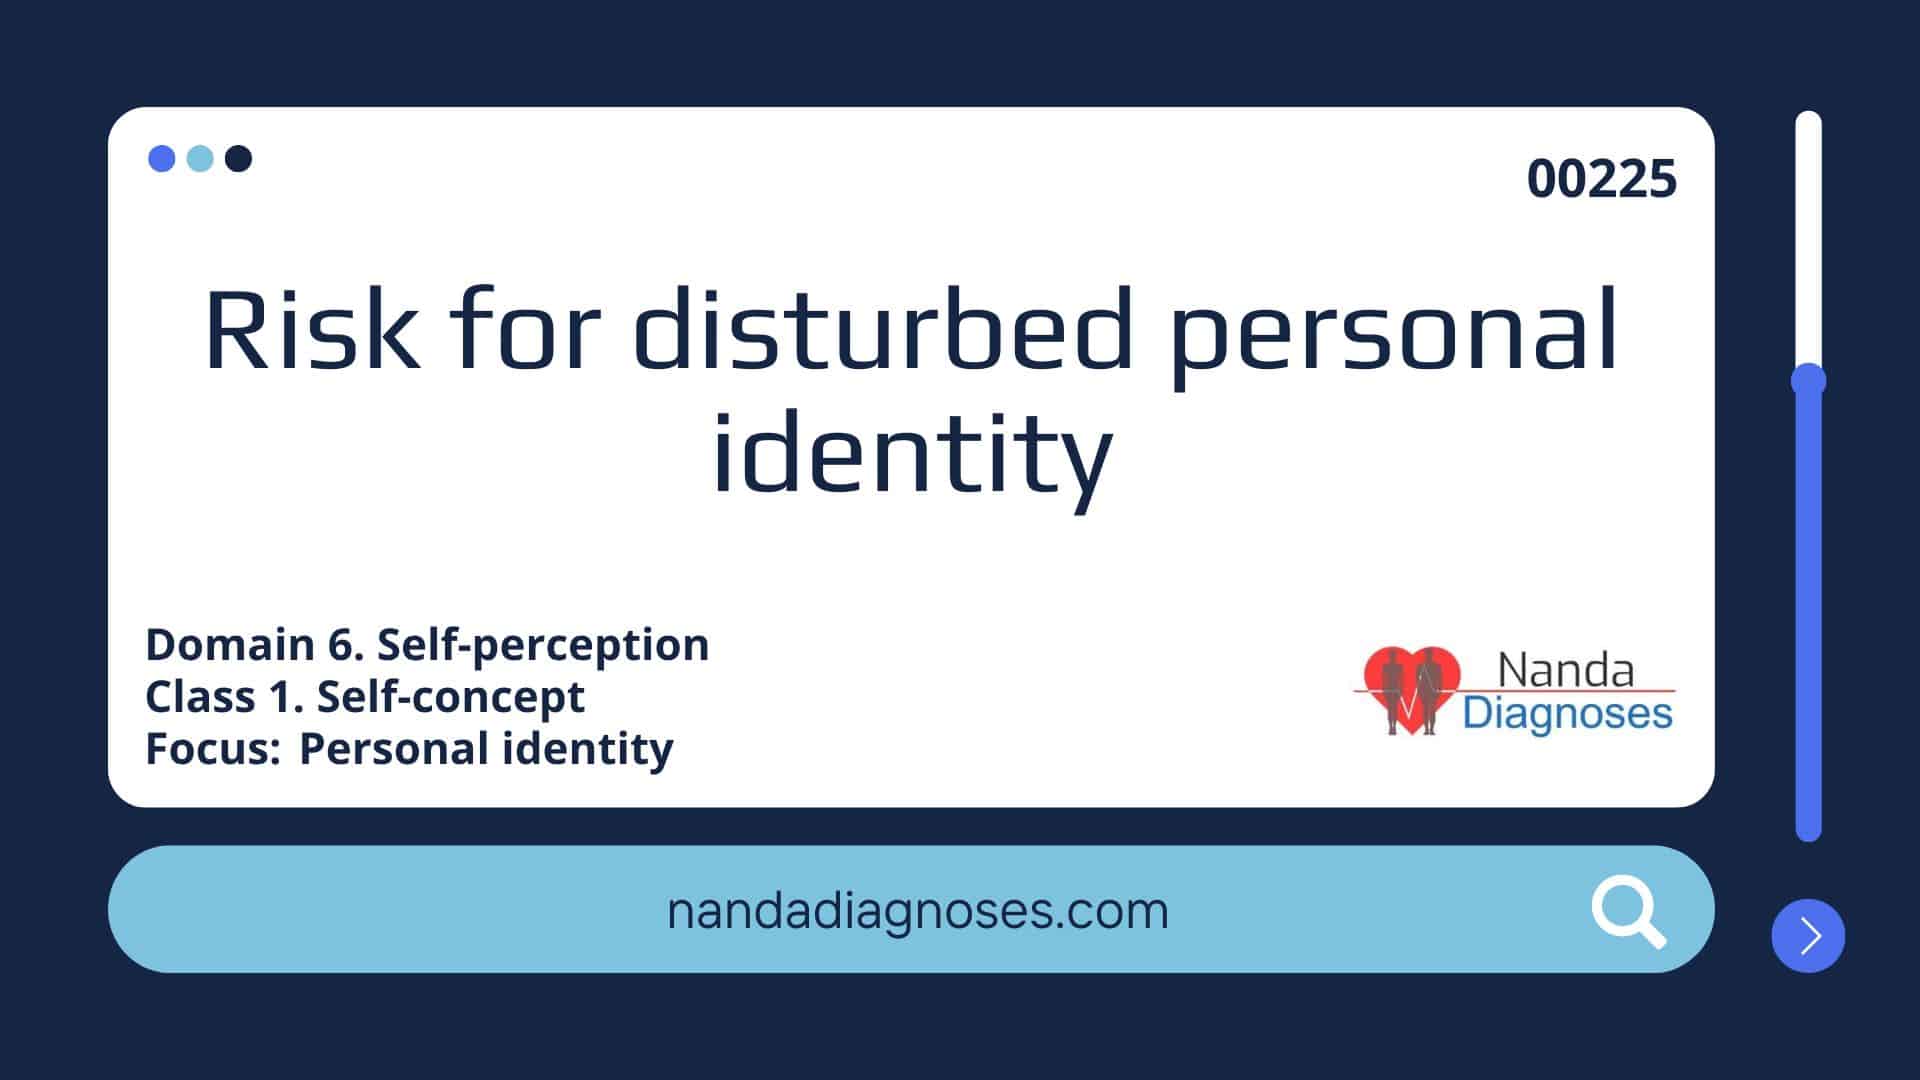 Nursing diagnosis Risk for disturbed personal identity